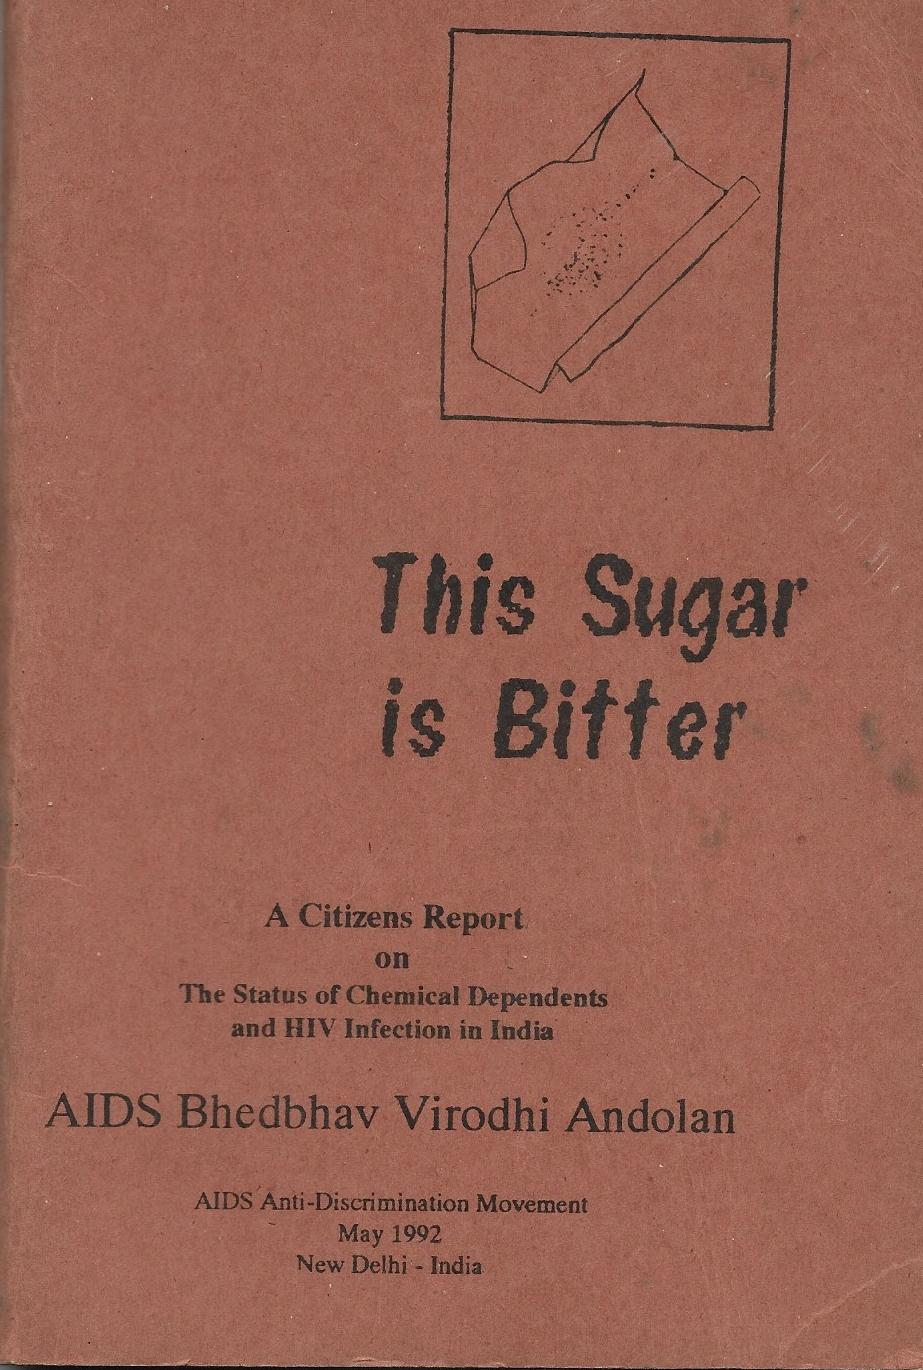 THIS SUGAR IS BITTER